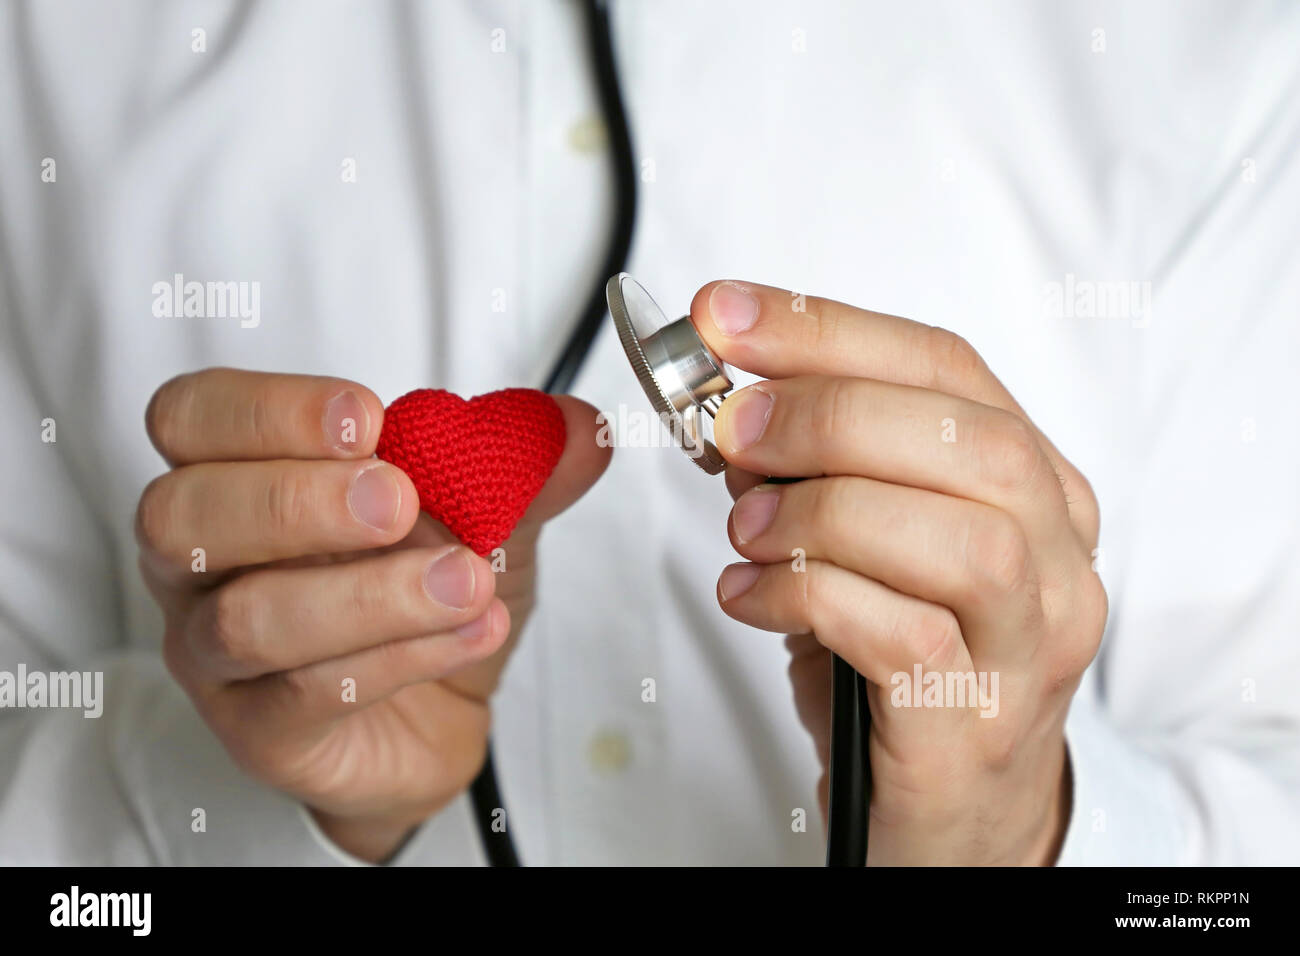 Doctor with stethoscope and red knitted heart in hand. Concept of cardiology, heart diseases, diagnosis, auscultation, medical exam Stock Photo